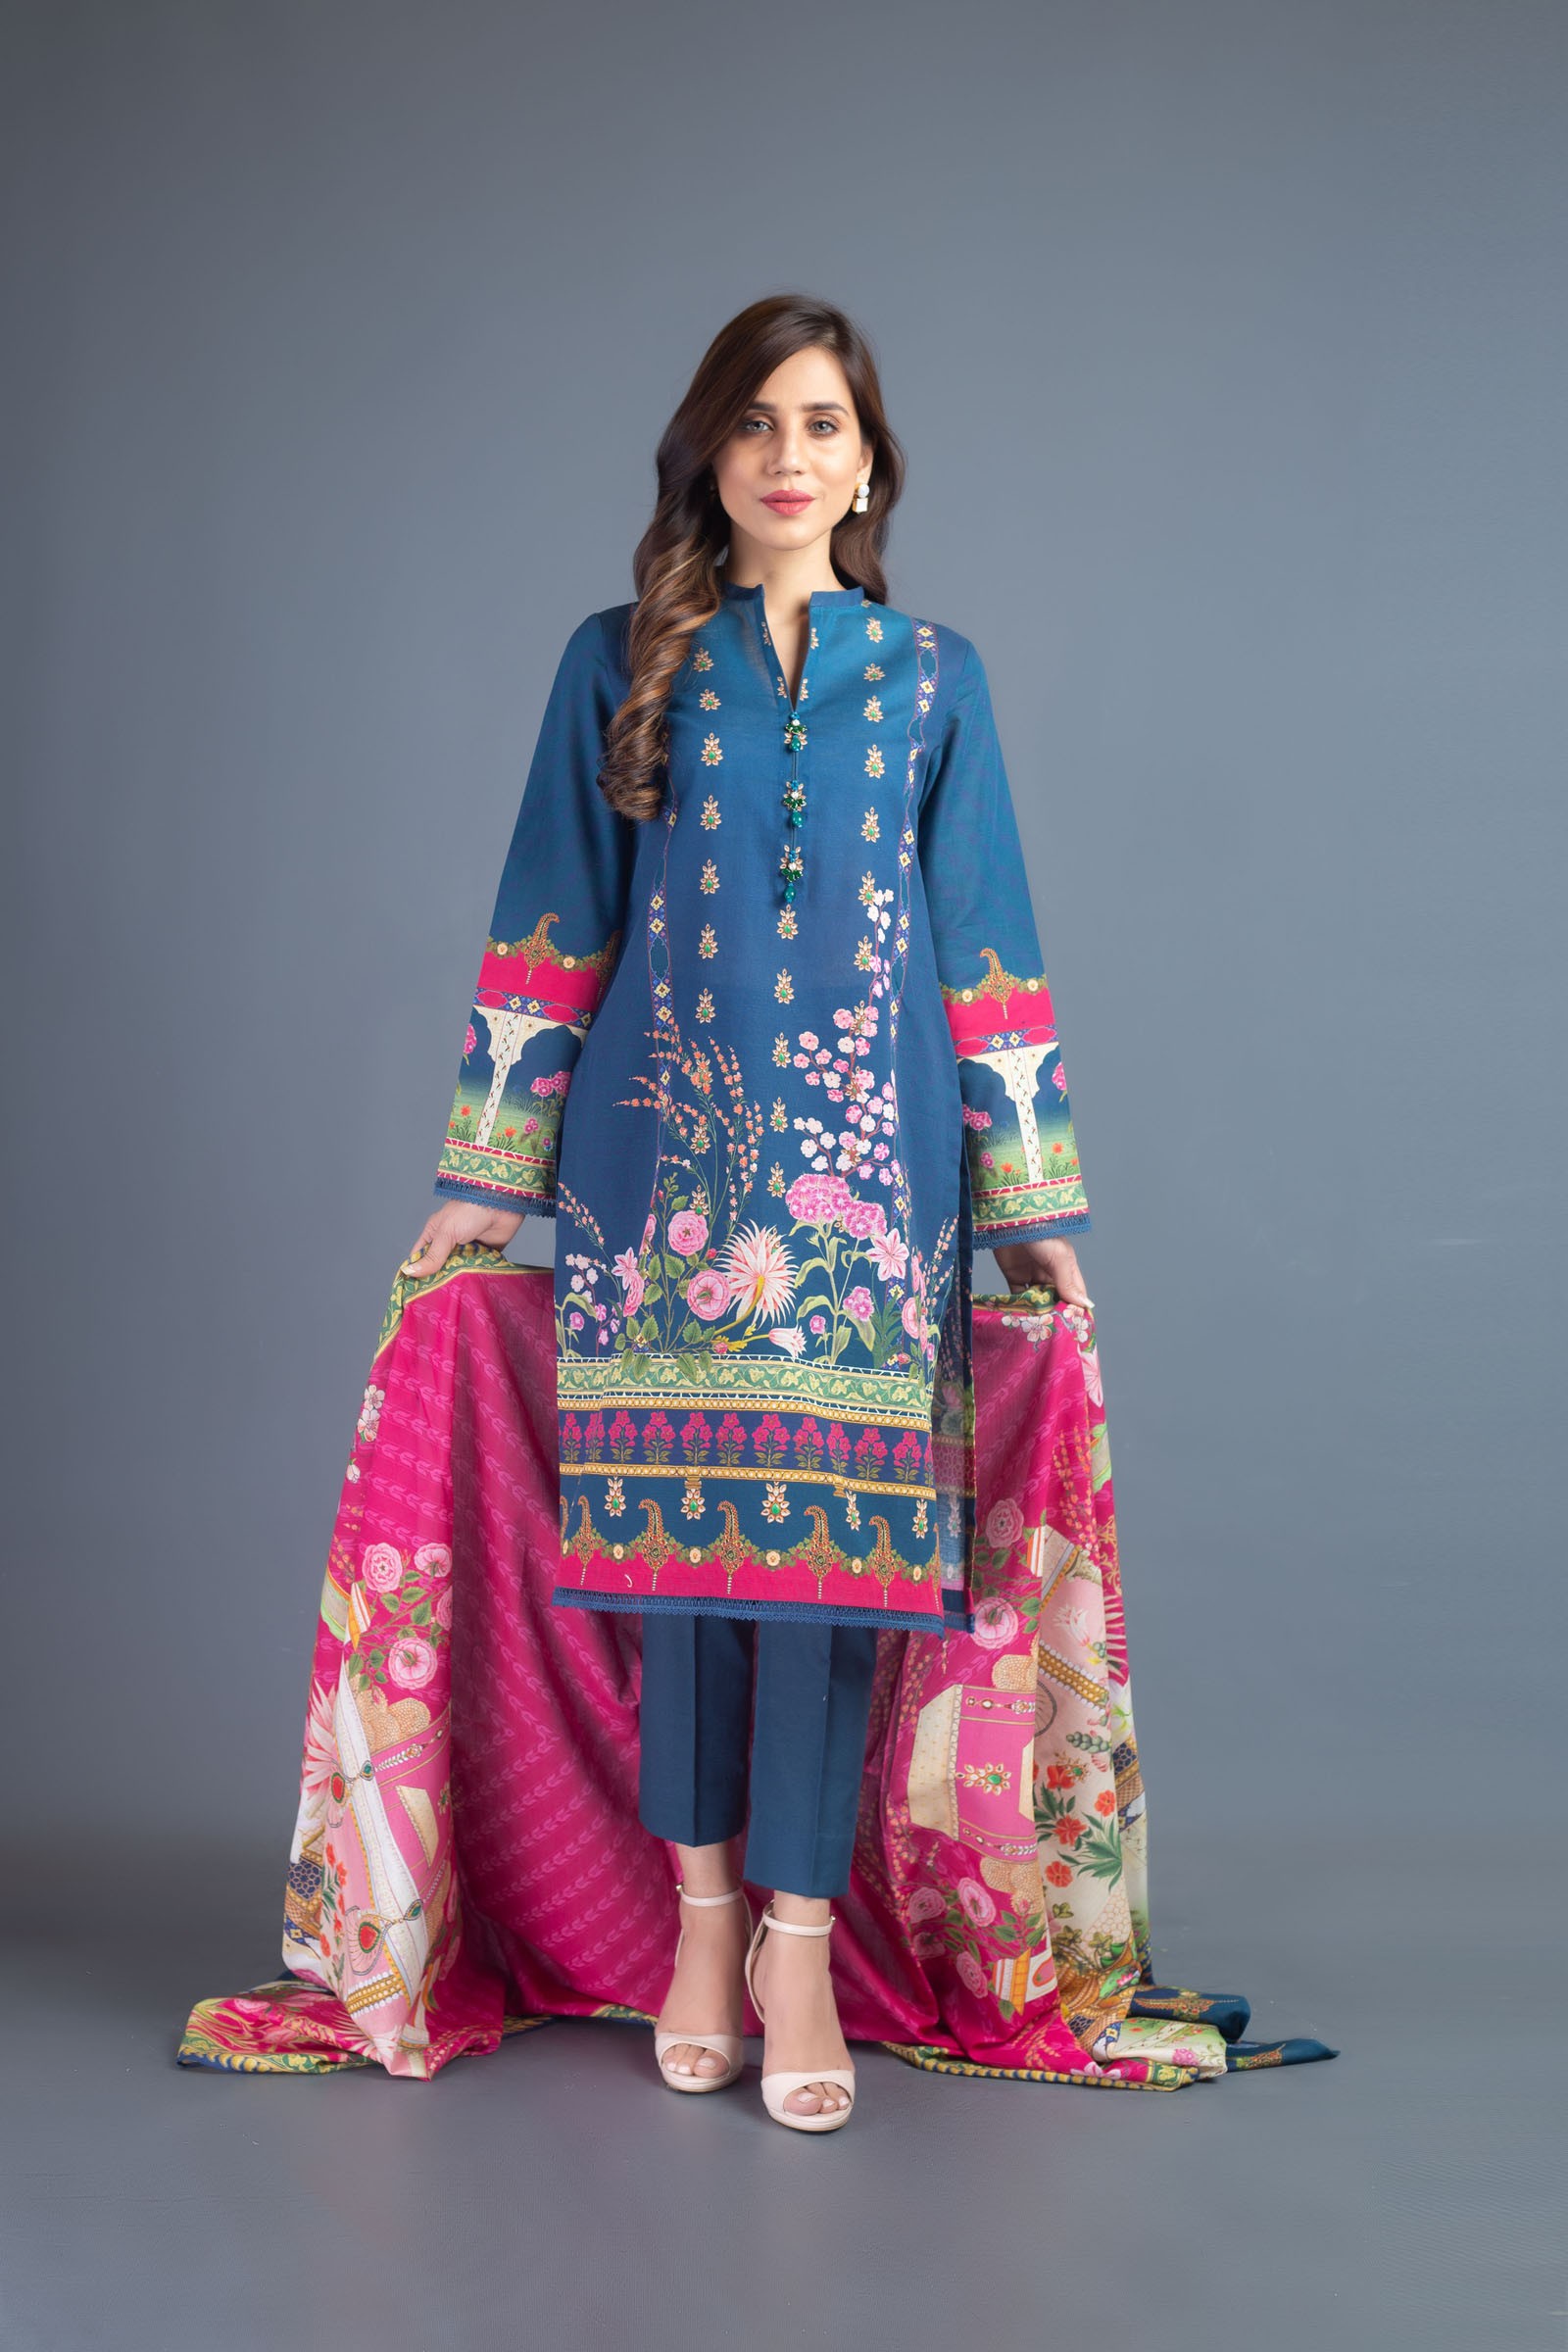 Bareeze Luxury Winter Embroidered Dresses Shawls Designs